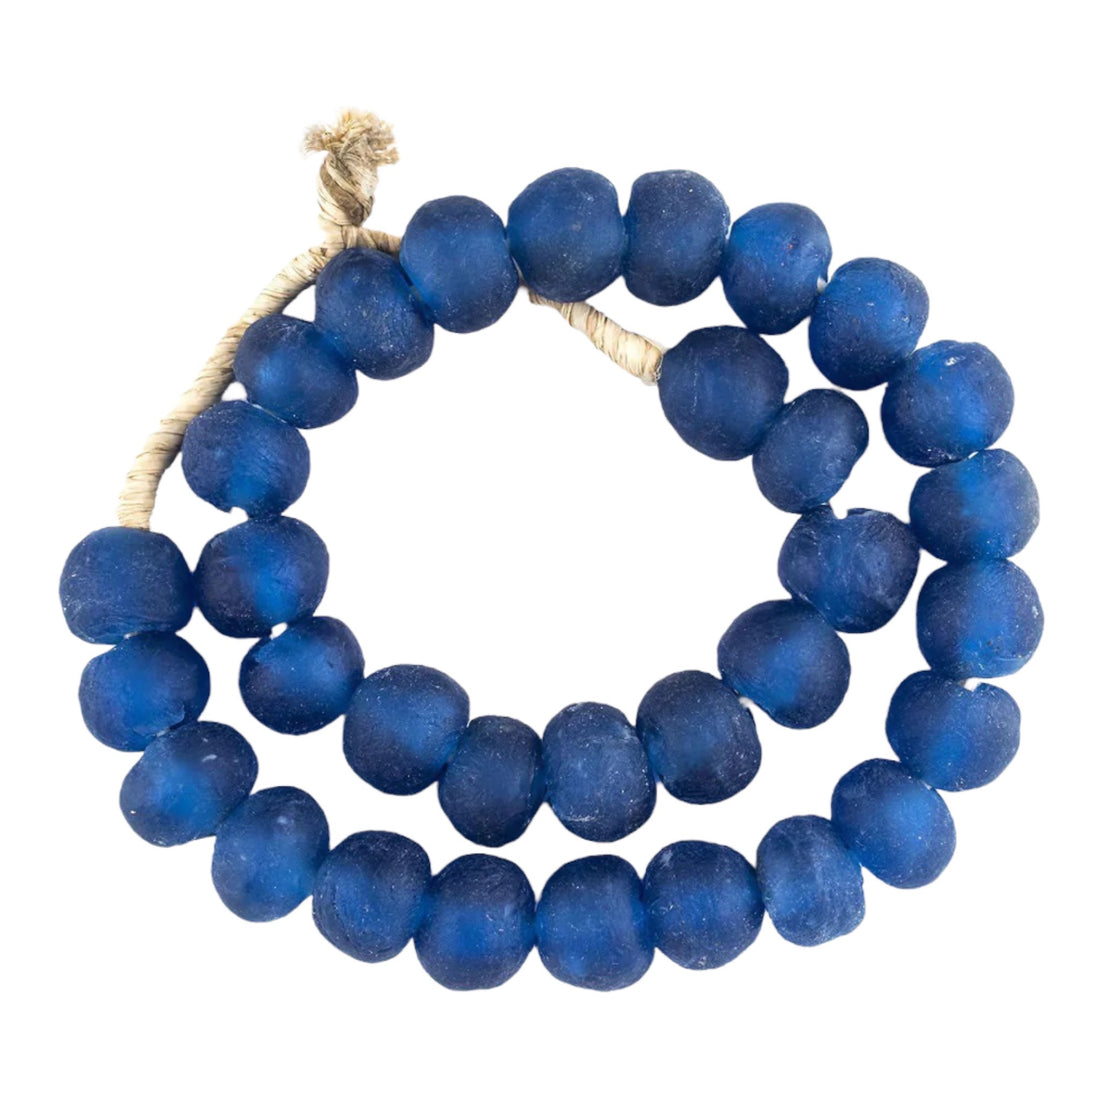 Ghanaian Glass Beads Imported - Royal Blue - eyahomeliving